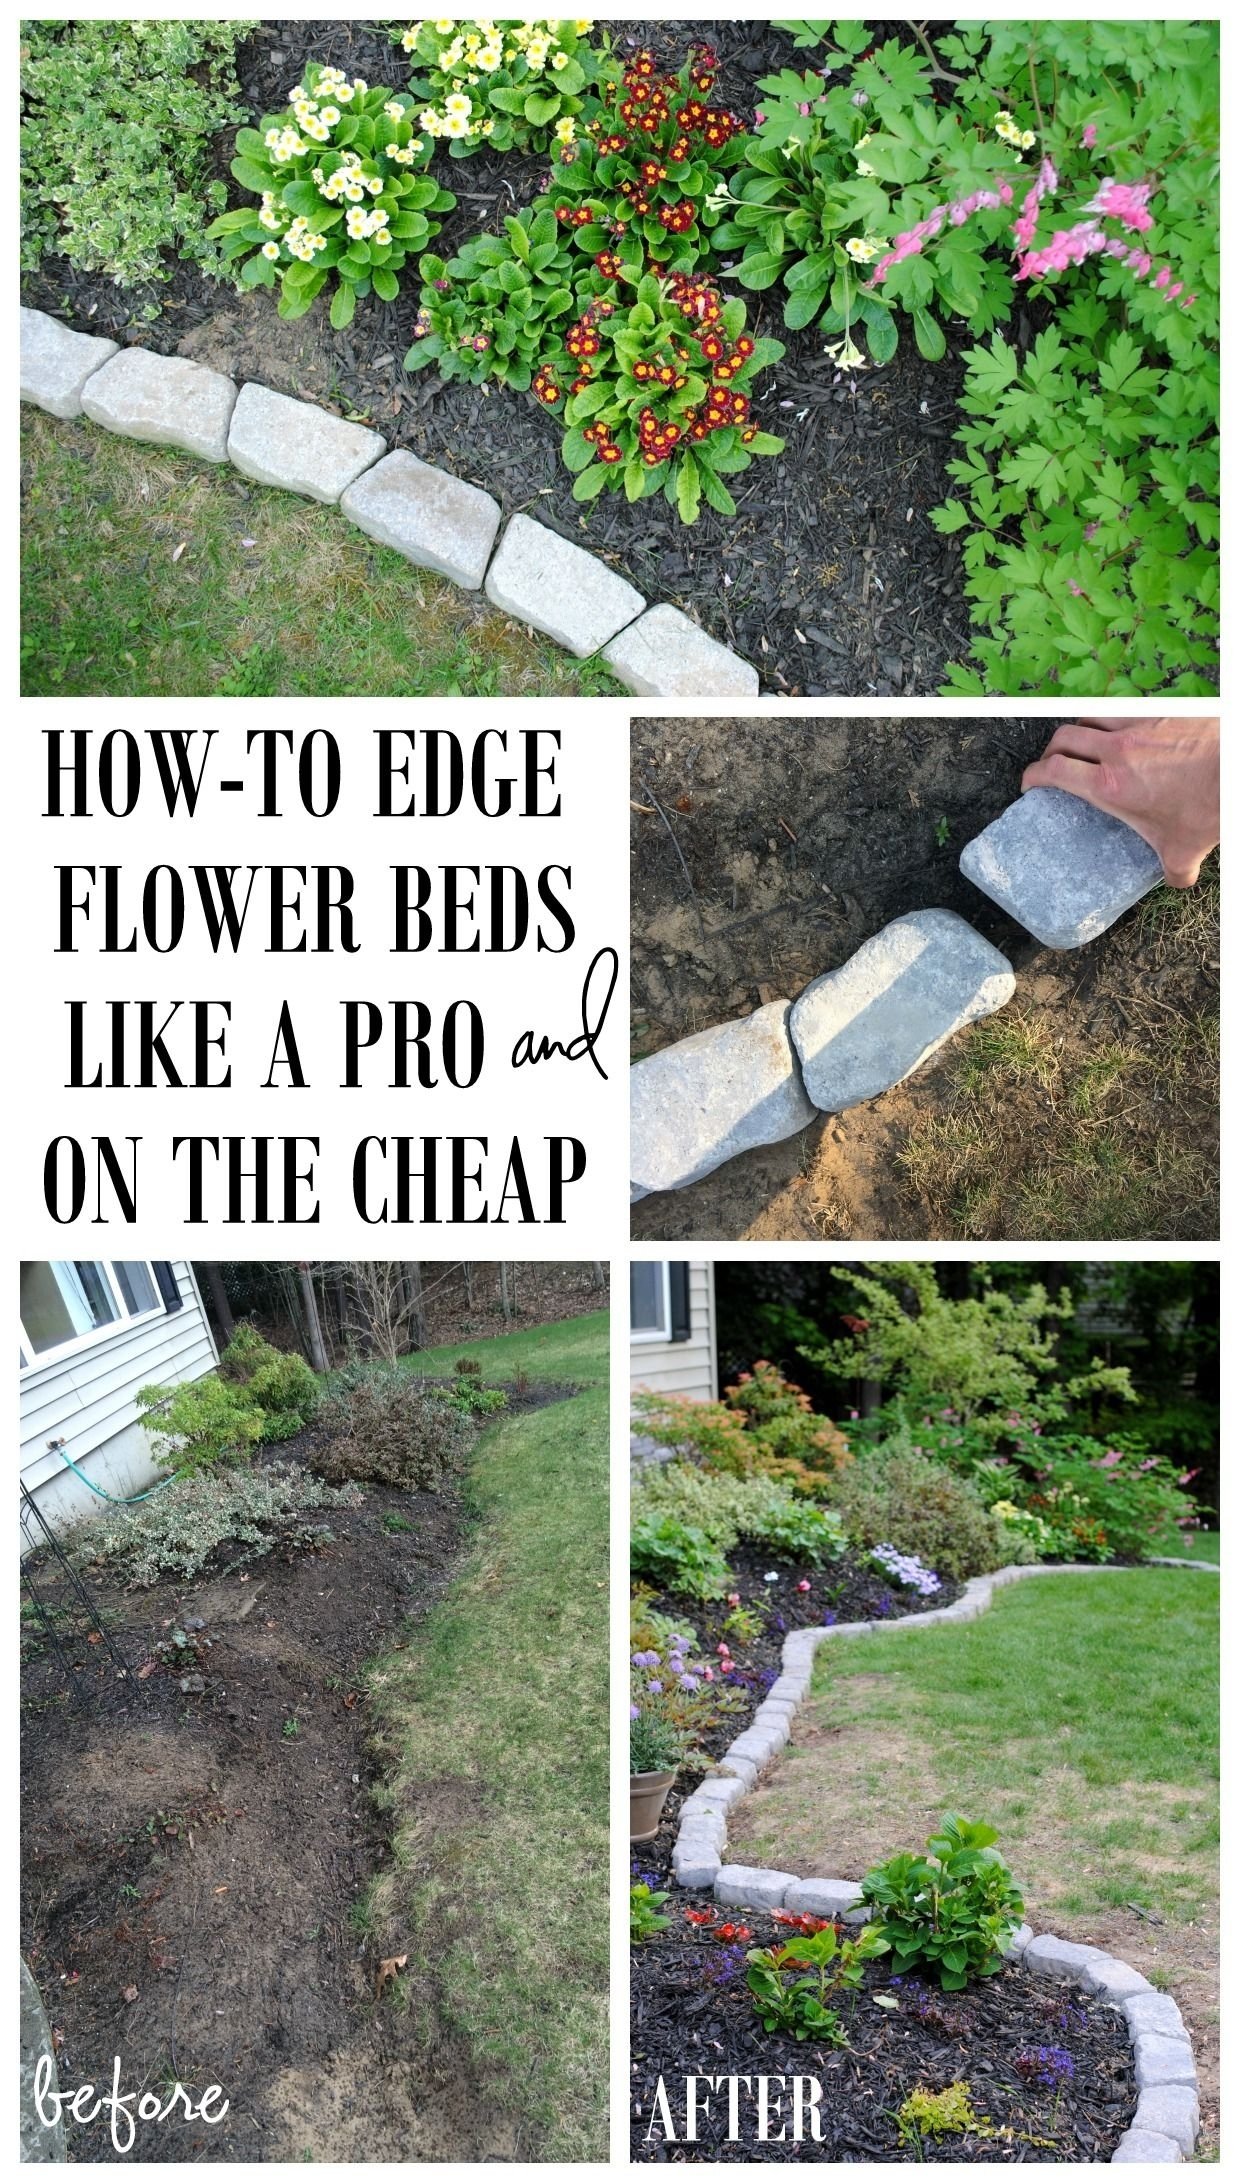 10 Fashionable Diy Landscaping Ideas On A Budget the perfect border for your beds defining a gardens edge with 1 2022